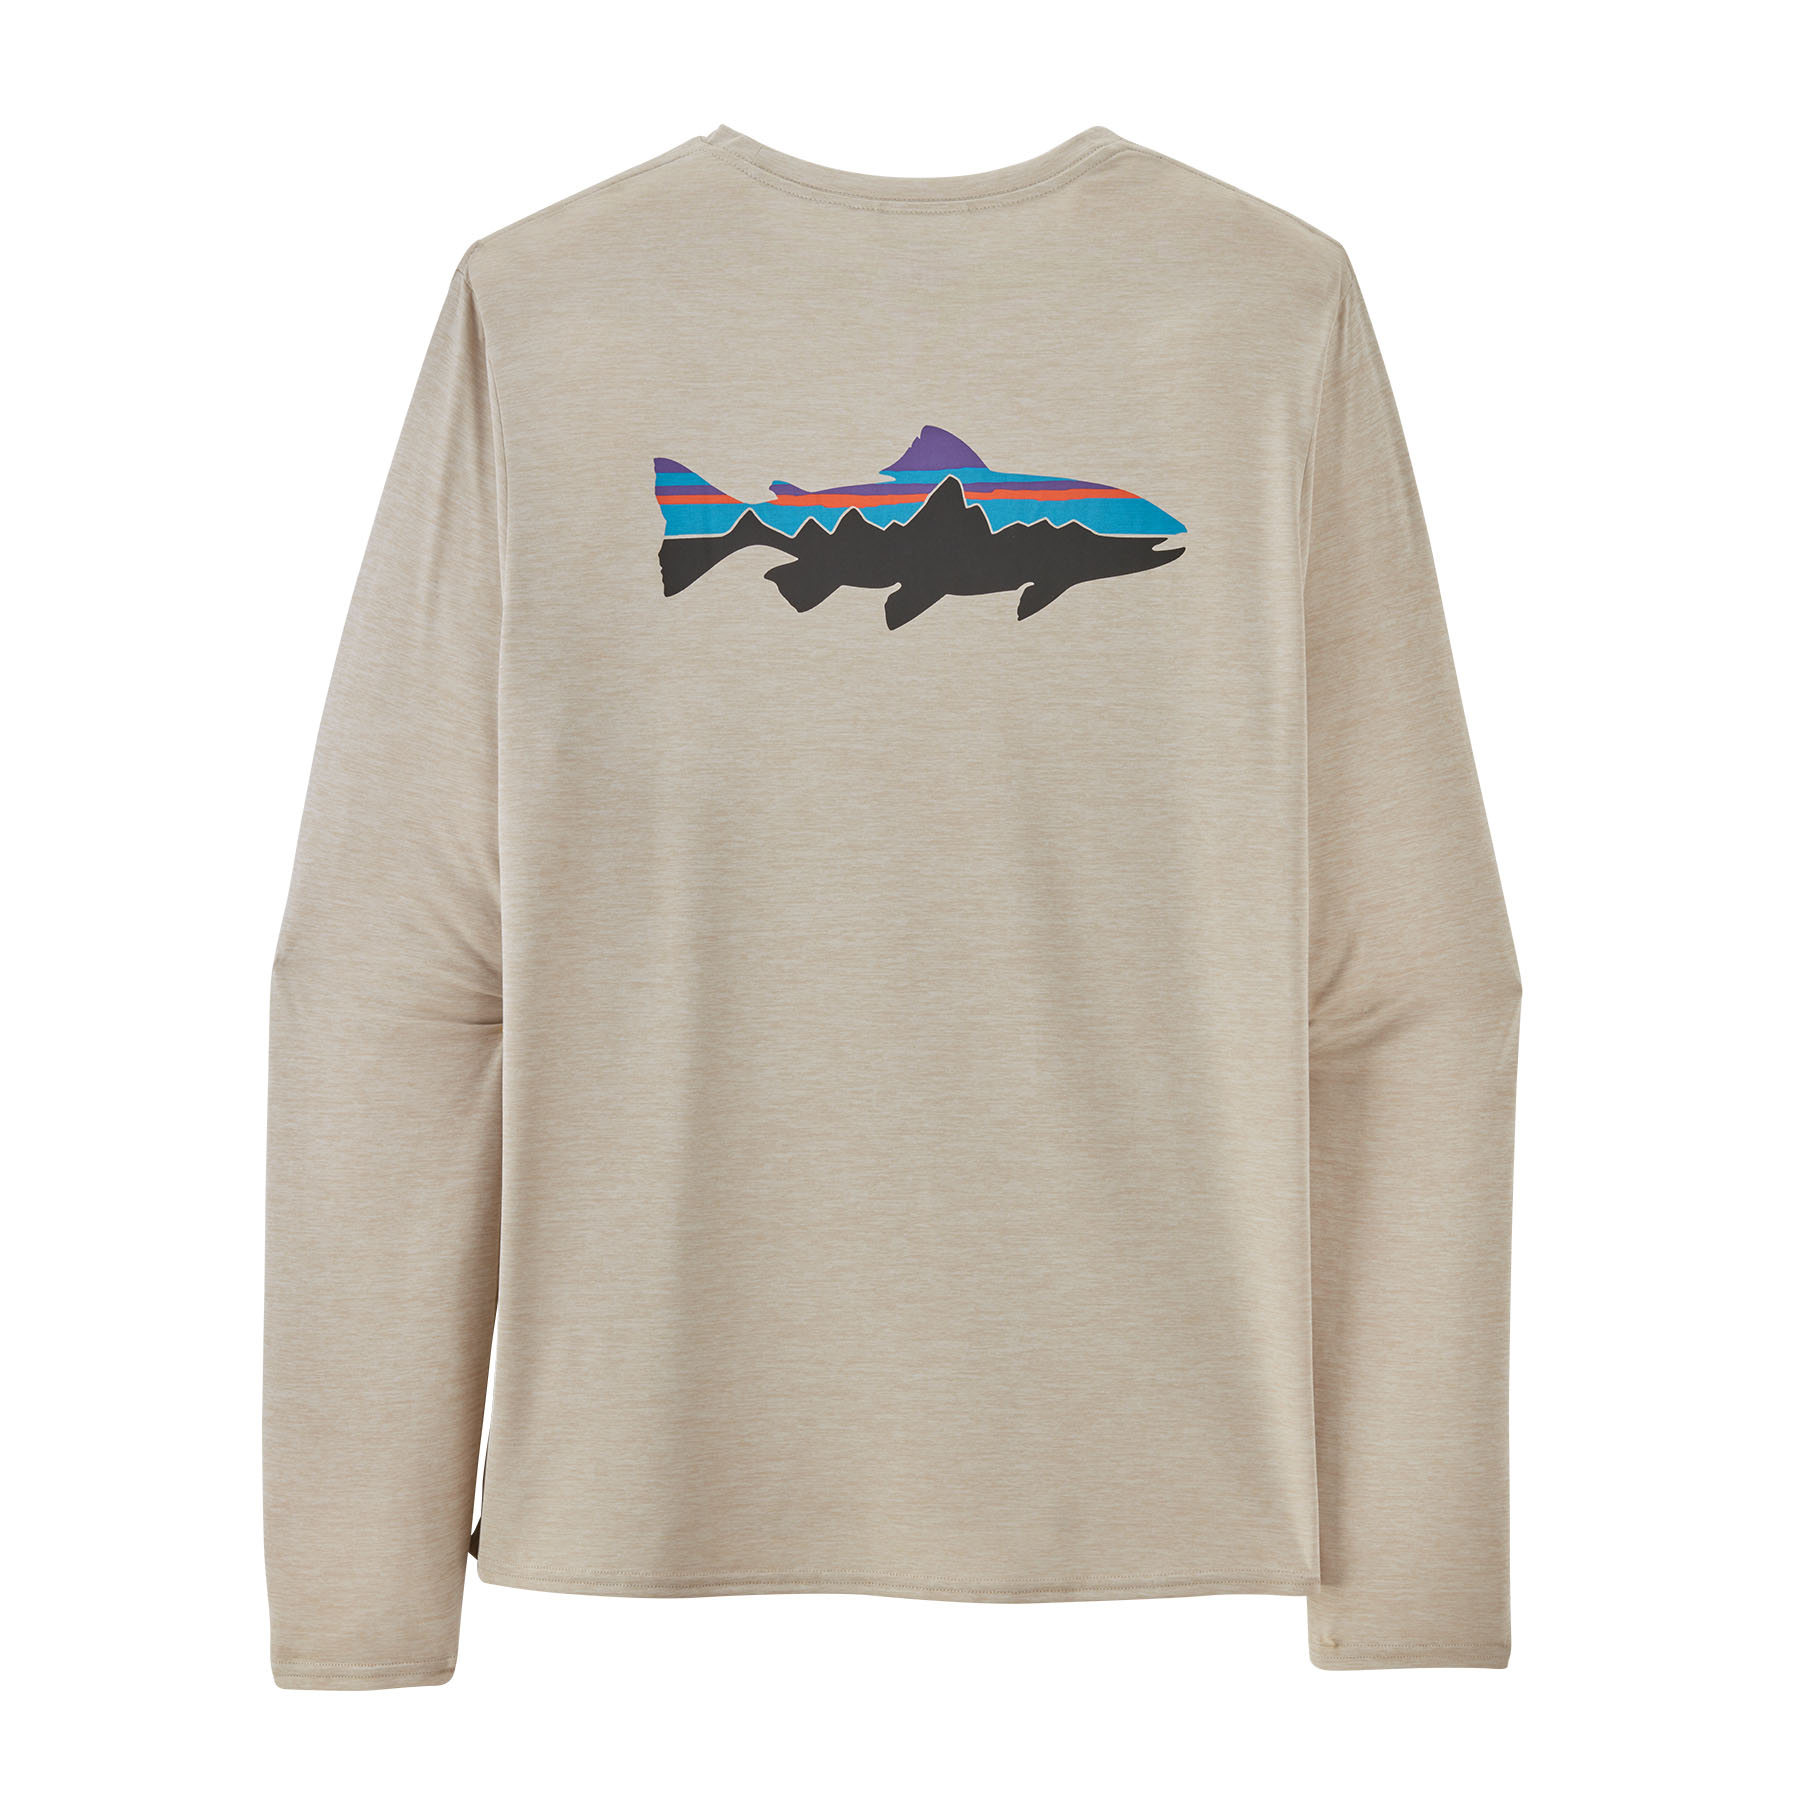 Longsleeve Cap Cool Daily Fish Graphic Shirt (Fitz Roy Trout: pumice)